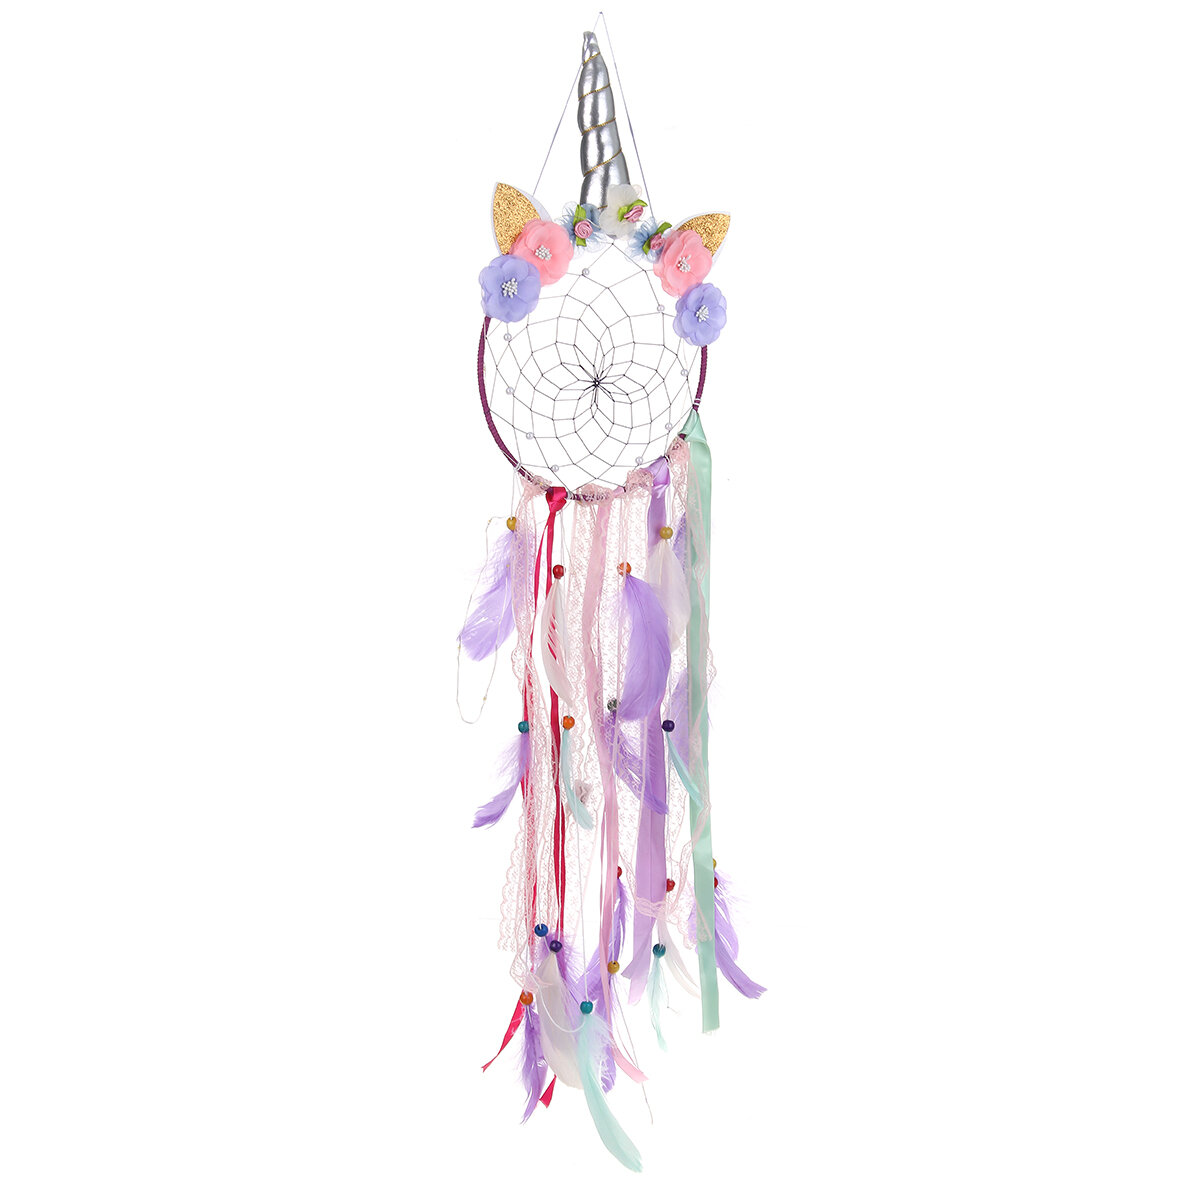 LED Dream Catcher Unicorn Feather Ornaments Handmade Wall Decorator Home Office